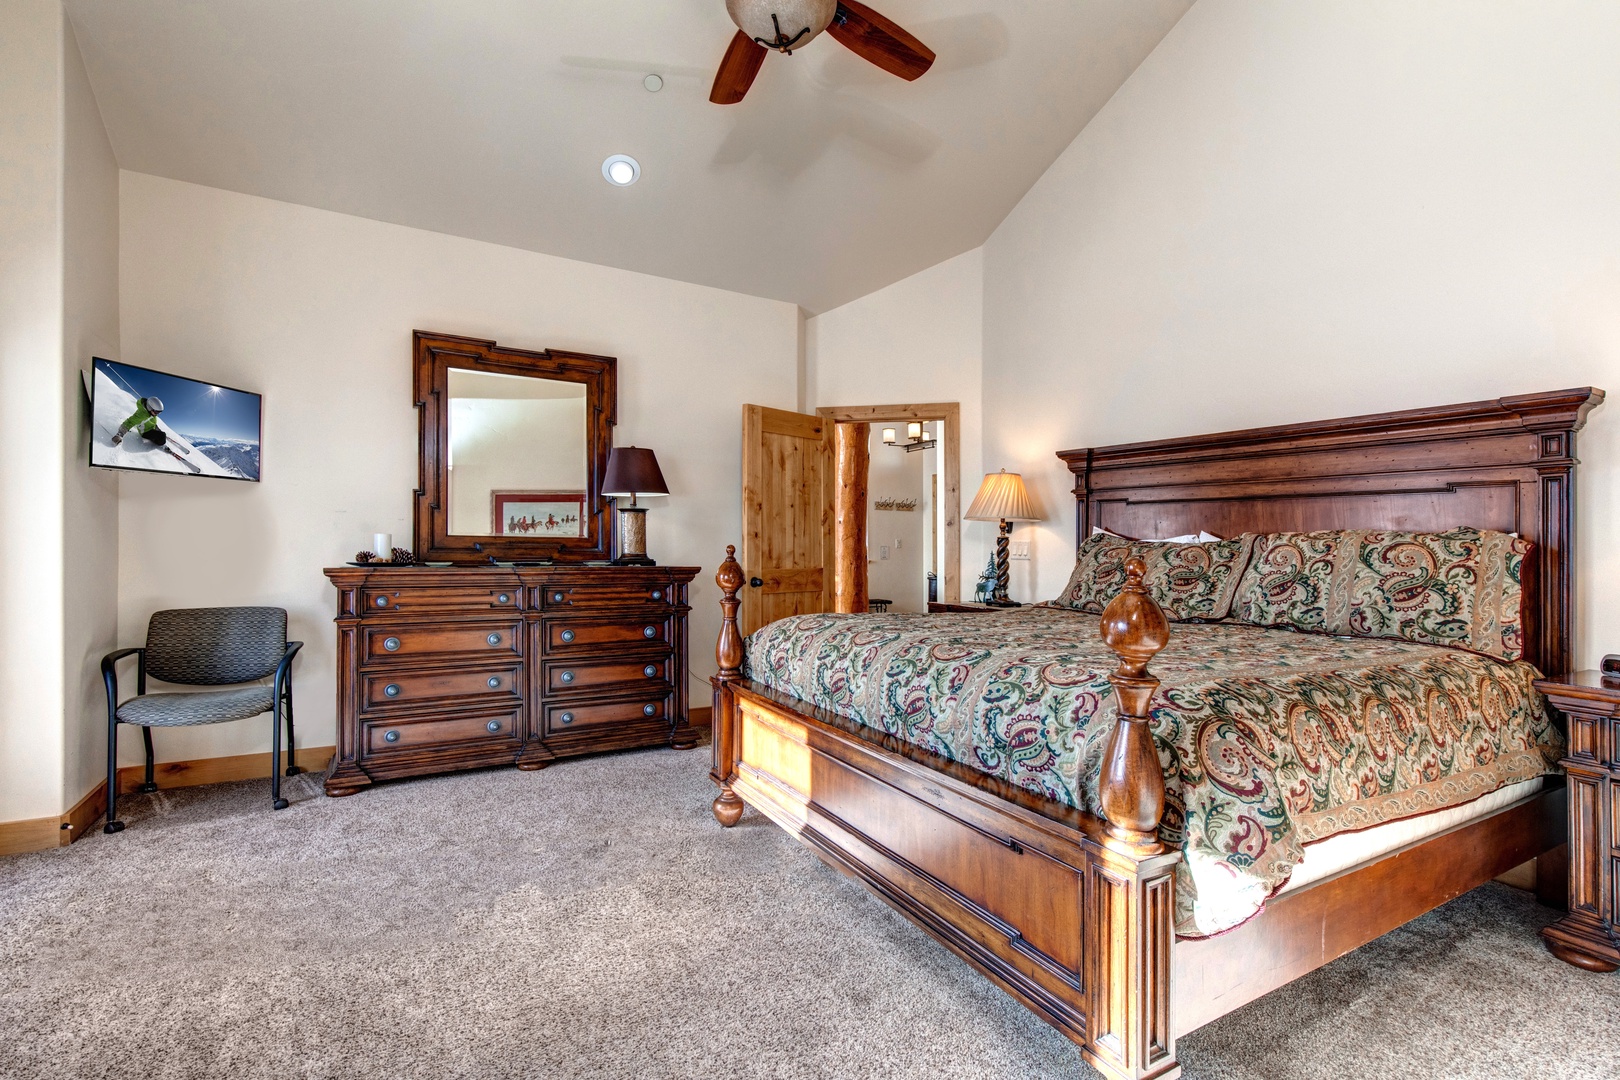 Park City Vacation Rentals, Cedar Ridge Townhouse - The master bedroom on the main floor has a king bed, TV, an en-suite bathroom, and access to a balcony.